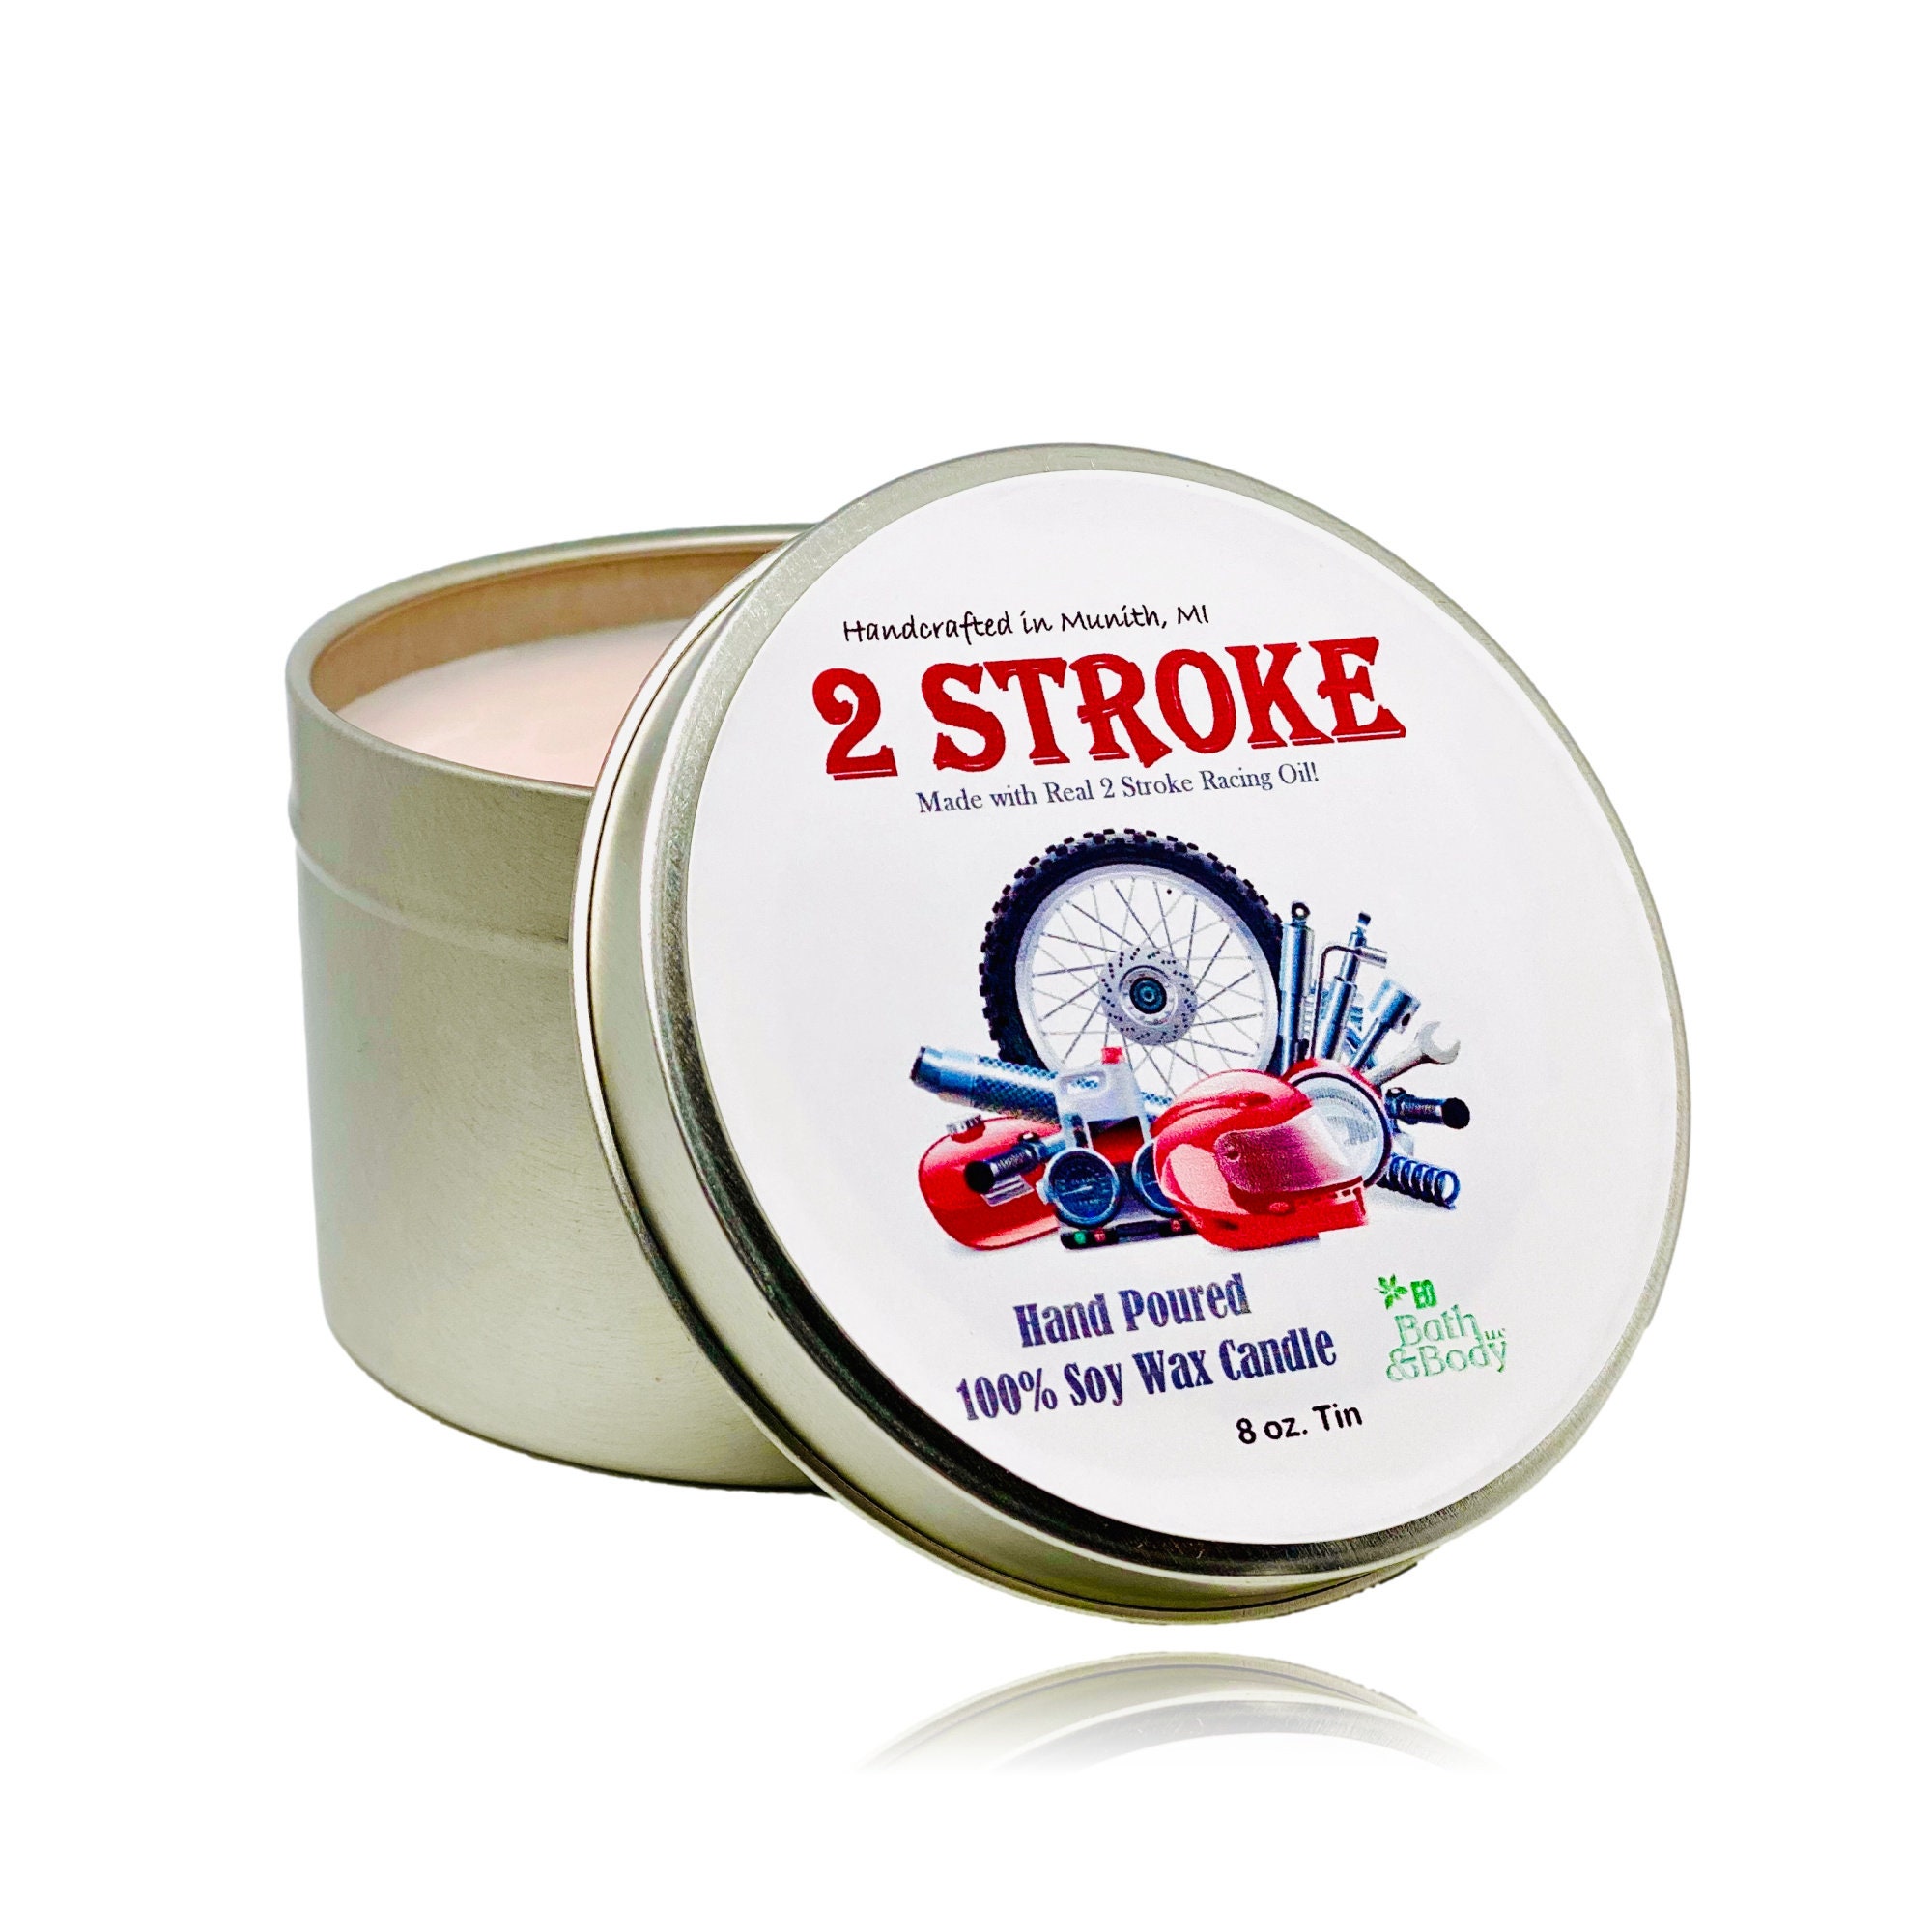 2- Stroke Candle, KLOTZ OIL Benol® Scented Candle - 8 oz 9905-0160 -  HVCcycle